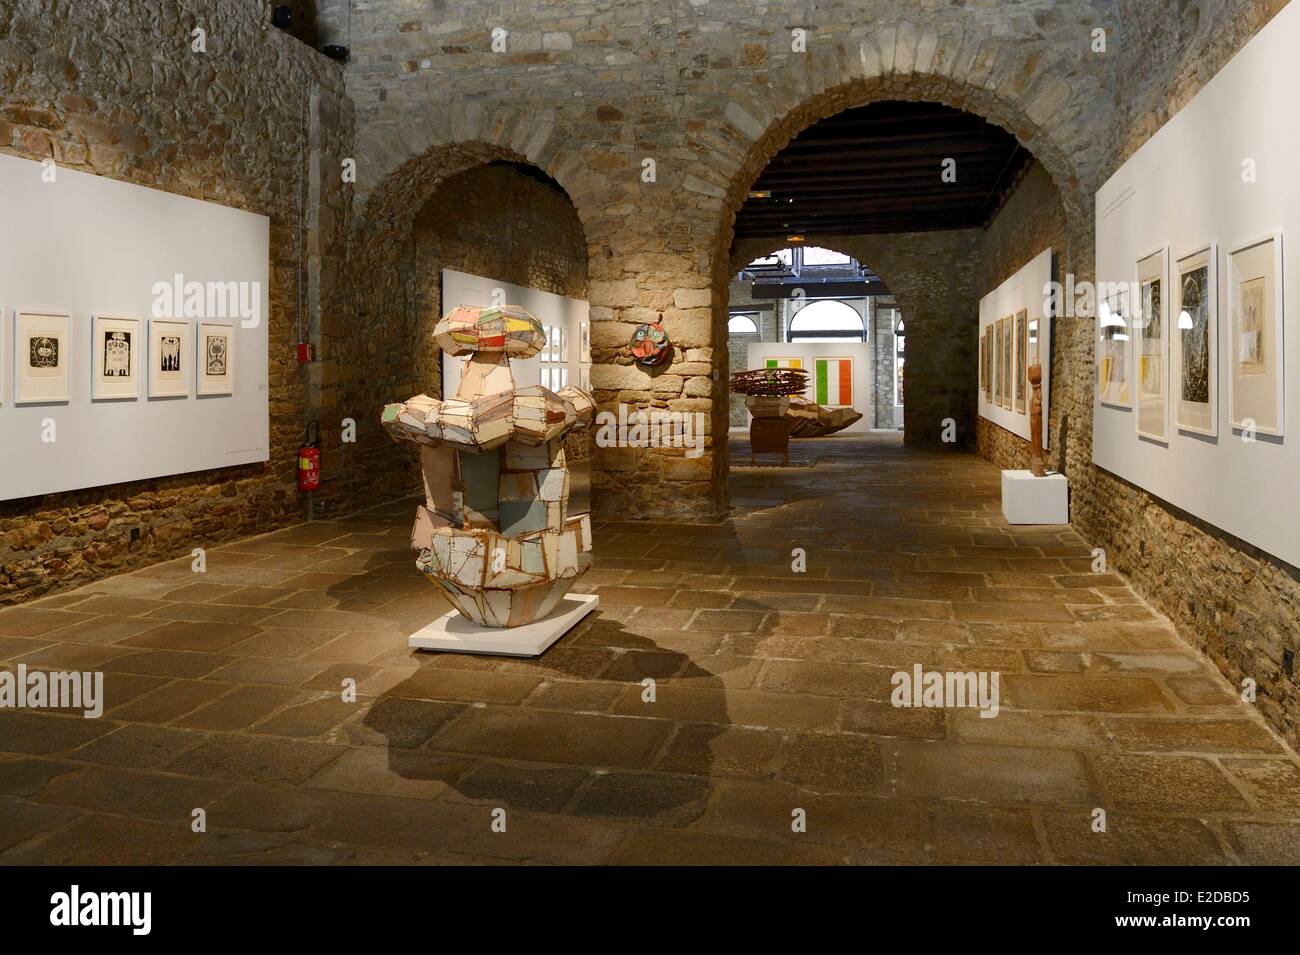 France, Morbihan, Gulf of Morbihan (Golfe du Morbihan), Vannes, the Cohue whose ground floor housed the medieval market, currently the Museum of Fine Arts Stock Photo